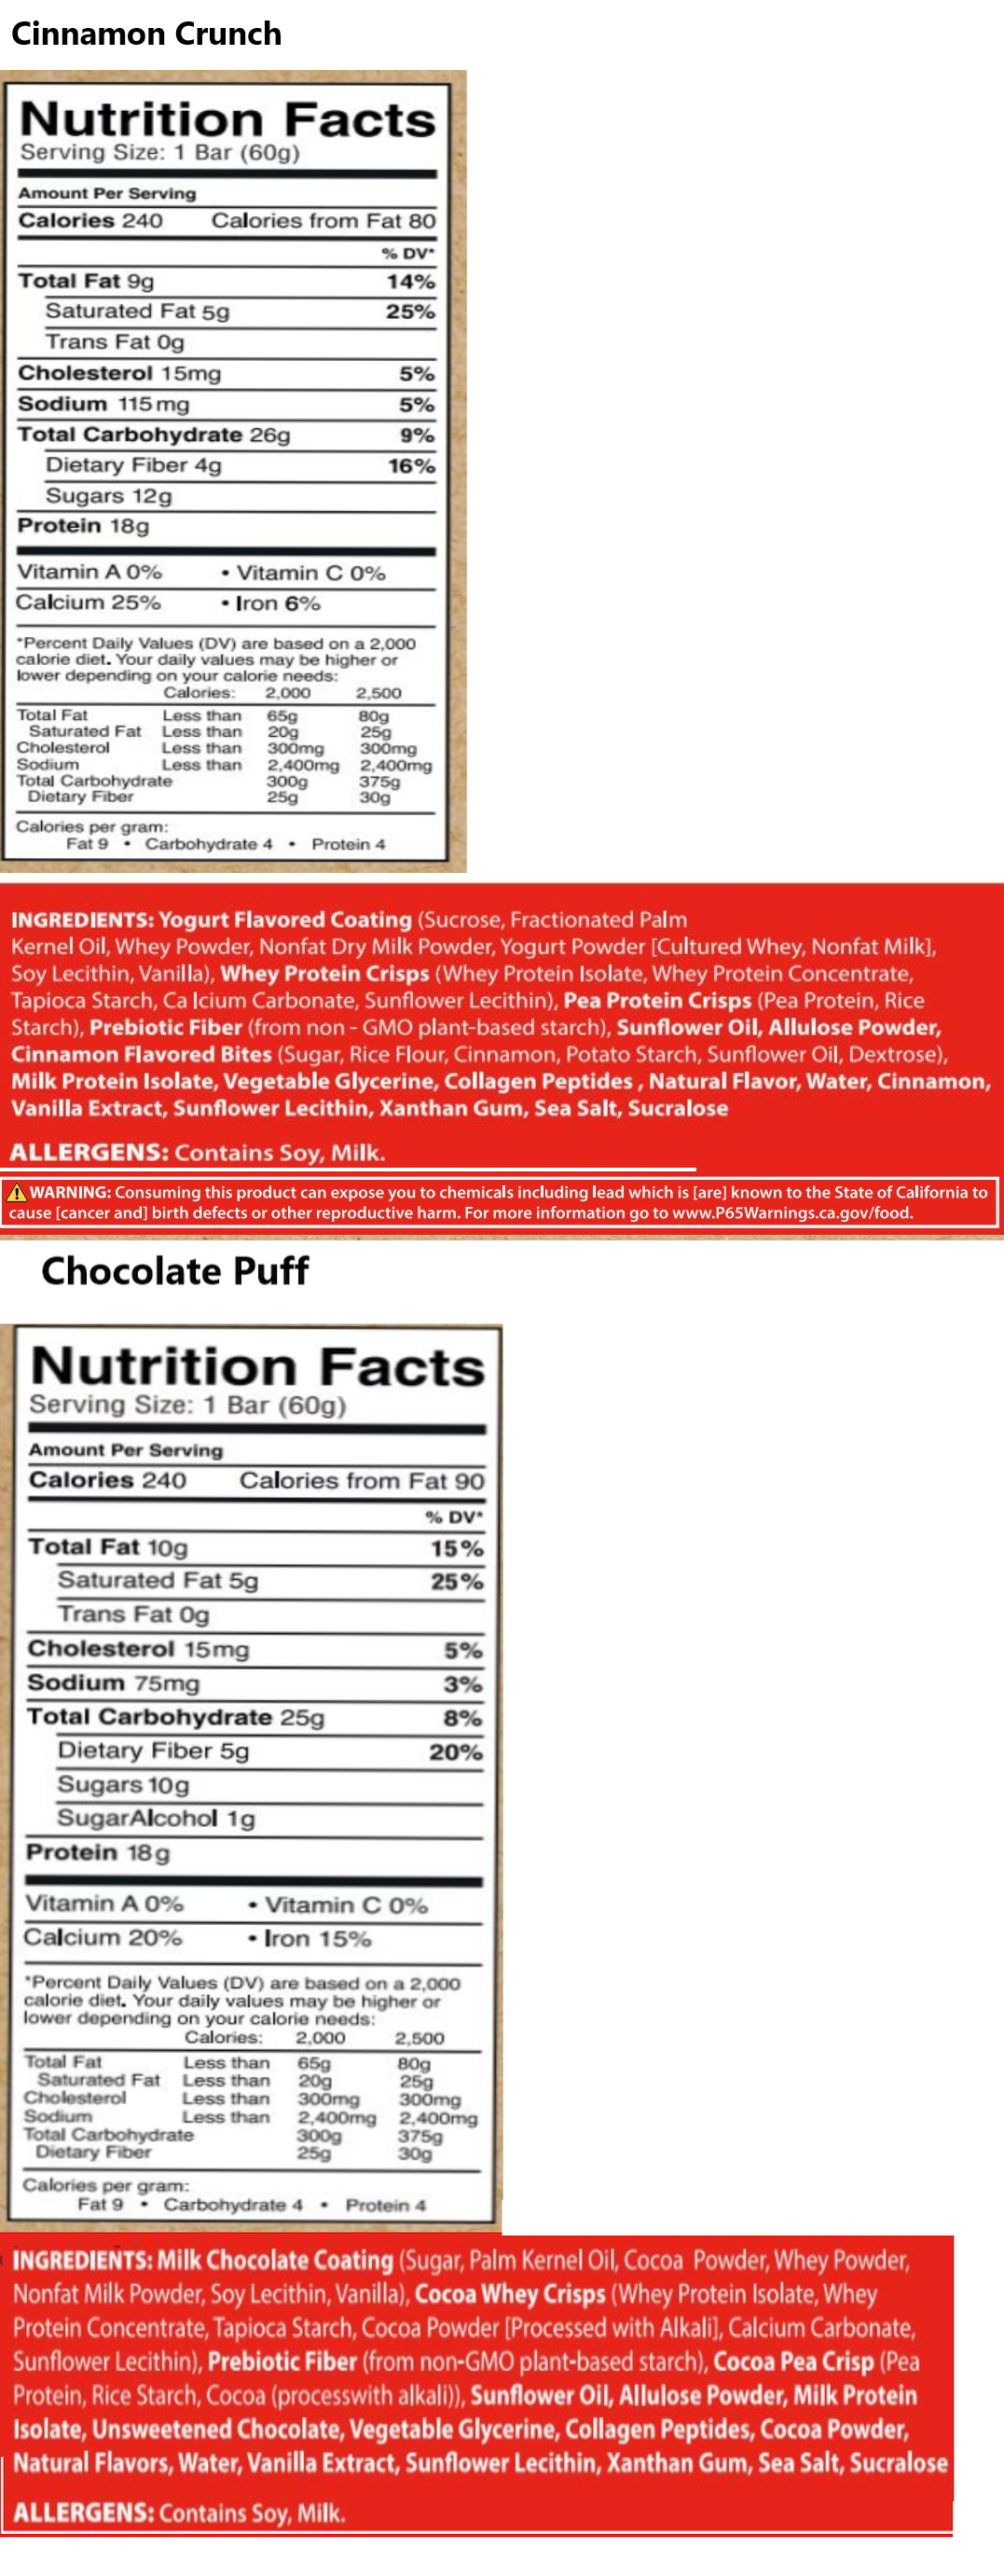 Nutrition facts for two 60g bars. Cinnamon Crunch: 240 calories, 9g fat, 26g carbs, 18g protein. Chocolate Puff: 240 calories, 9g fat, 25g carbs, 18g protein. Both contain soy and milk.